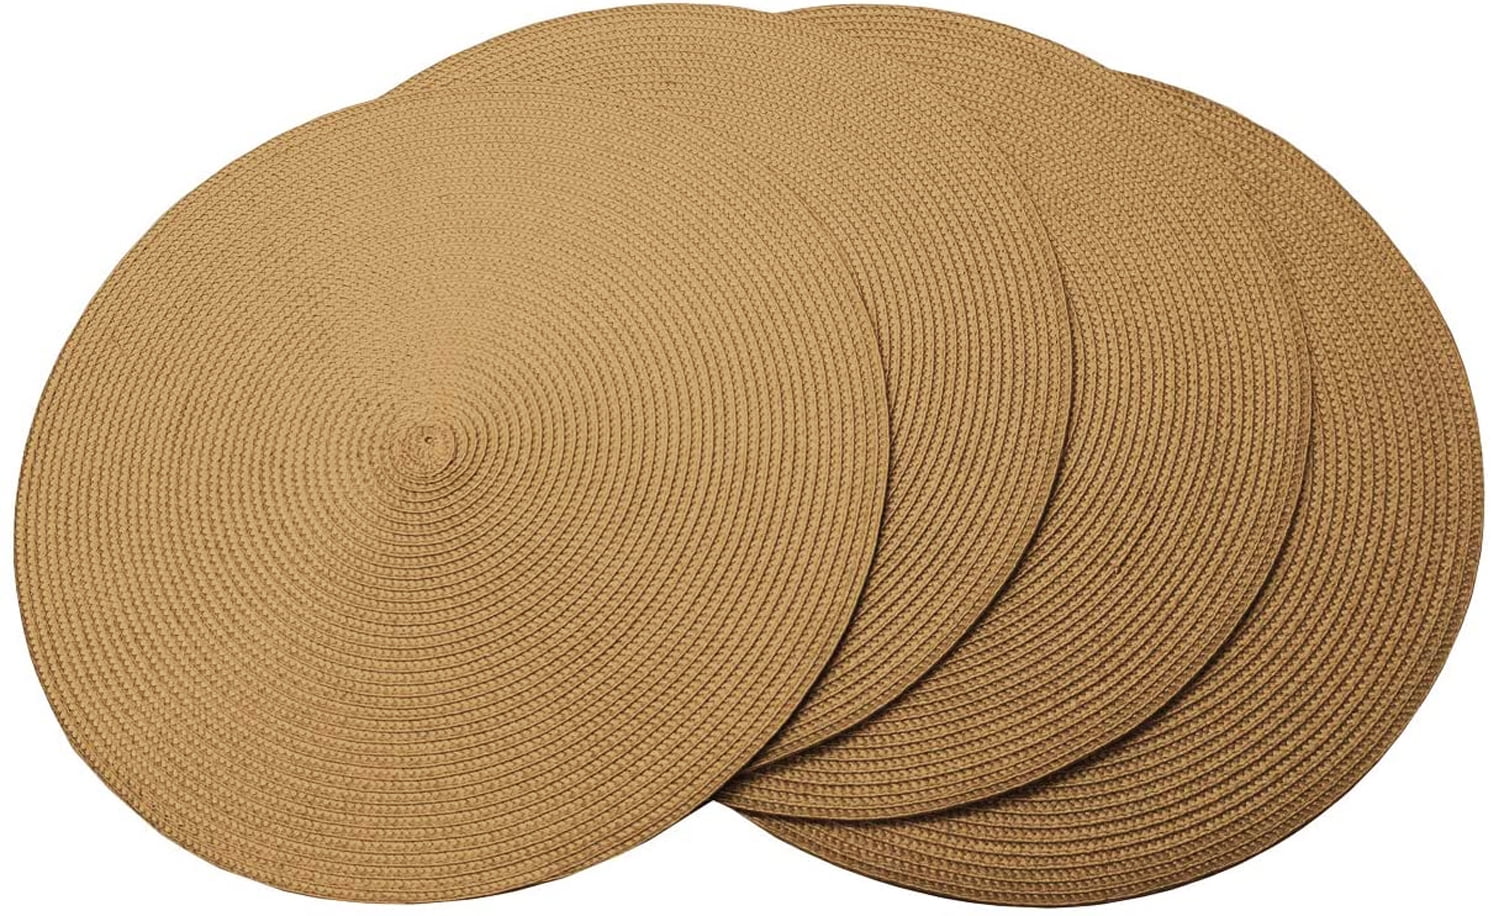 Stain-Proof and Non-Slip Beige Round Placemats,Woven Placemats Six-piece Set,Easy to Clean,Washable Suitable for Kitchen table,The Best Gift for Friends Heat-Resistant 14.17 Inches Wife,Mothers 